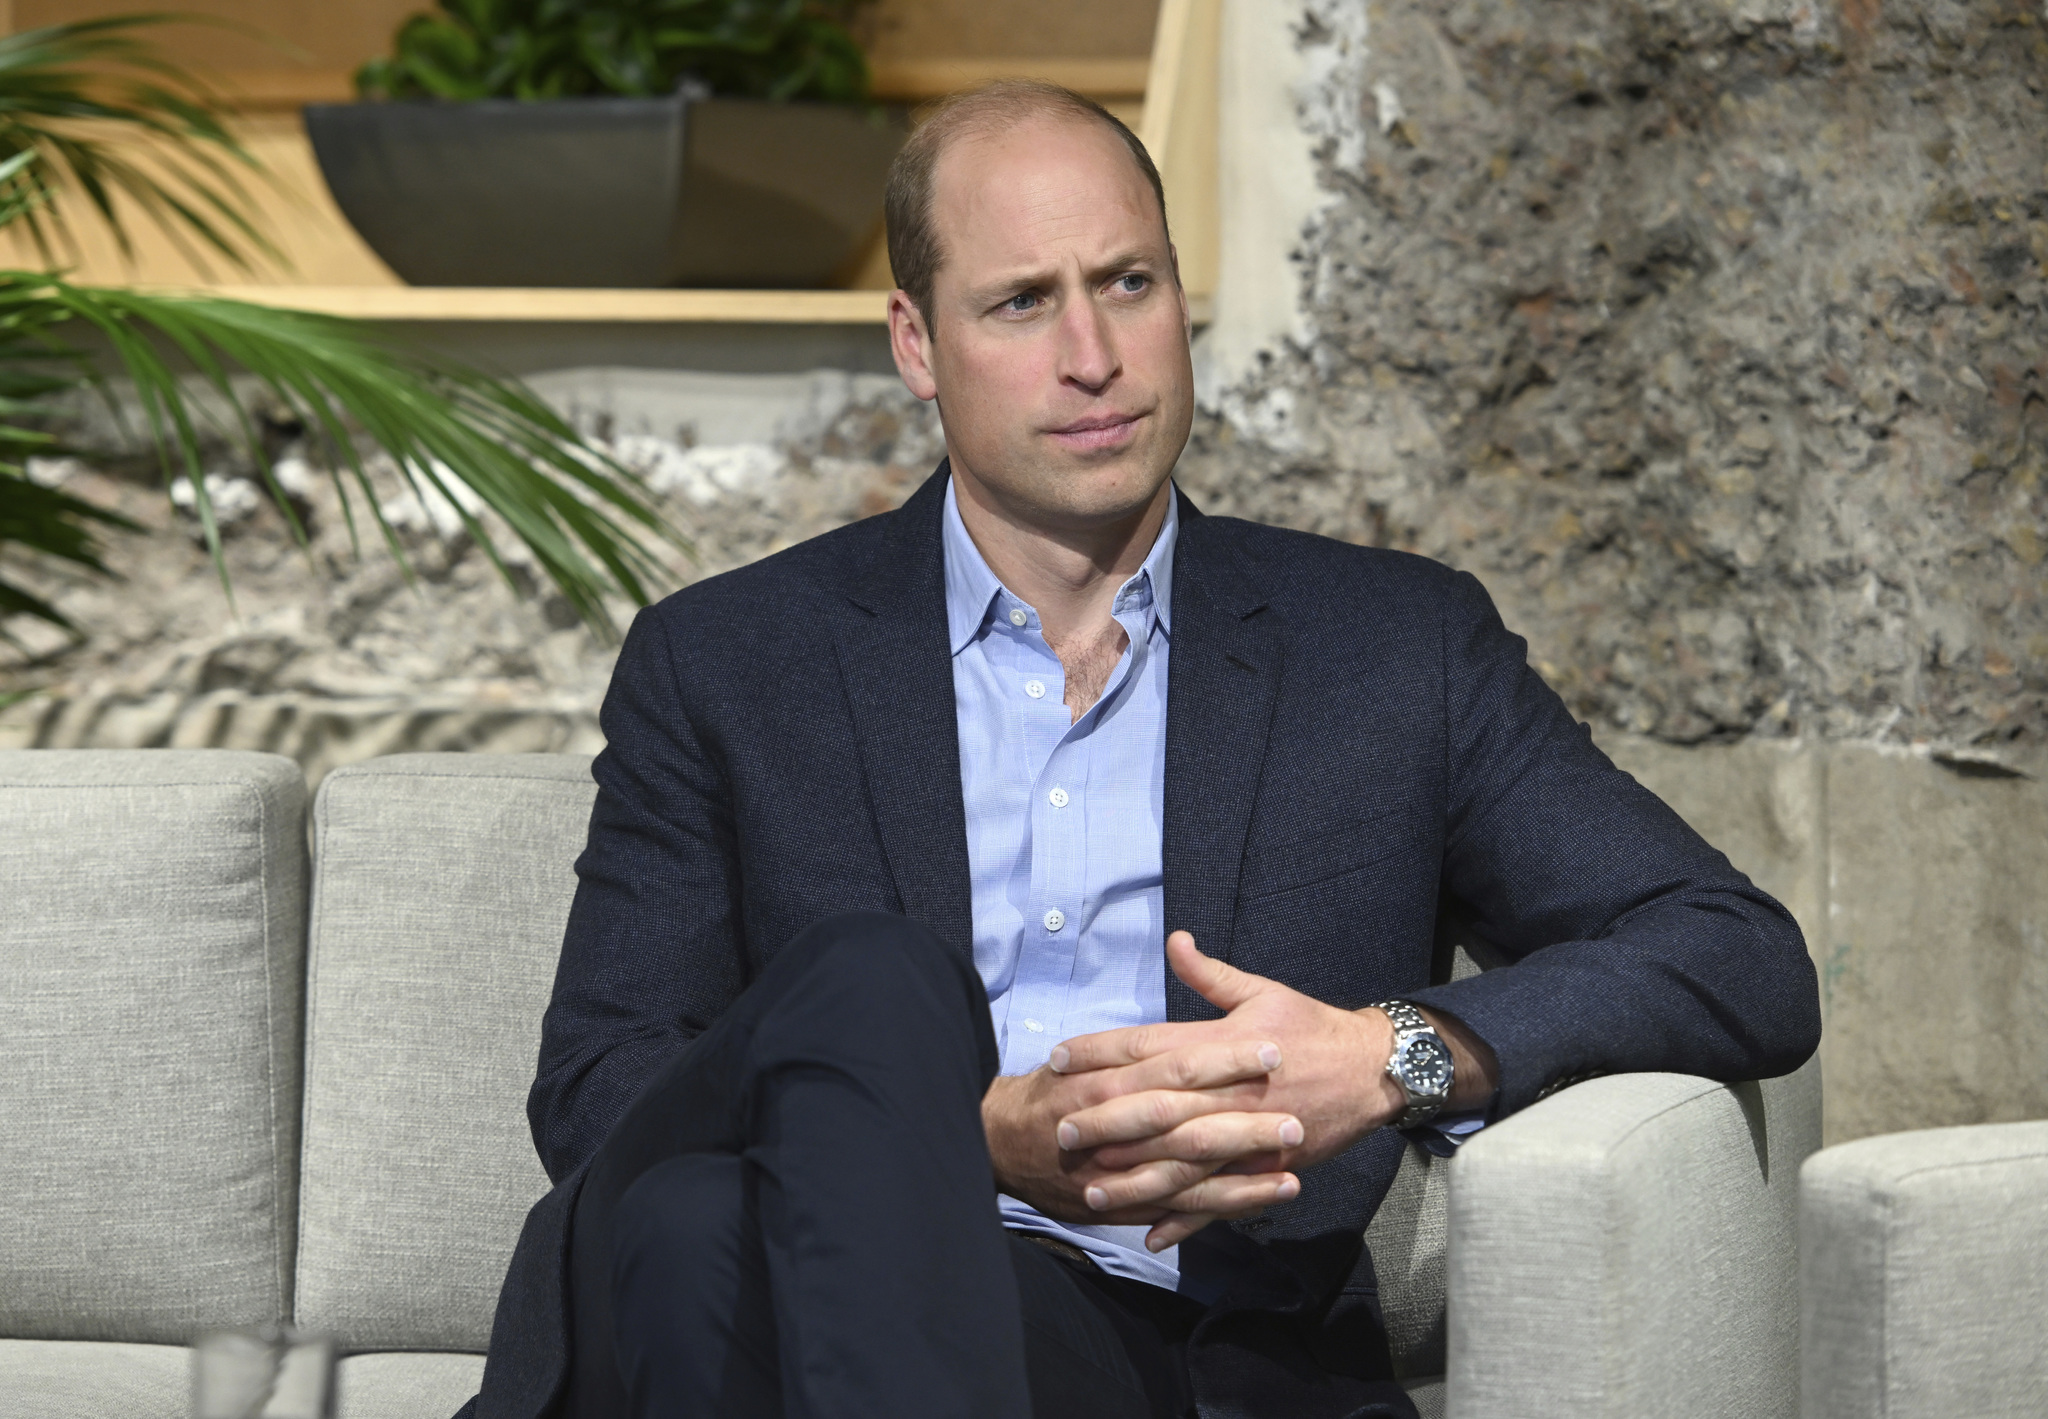 Prince WIlliam visits Sustainable Ventures, Europe's largest climate tech hub